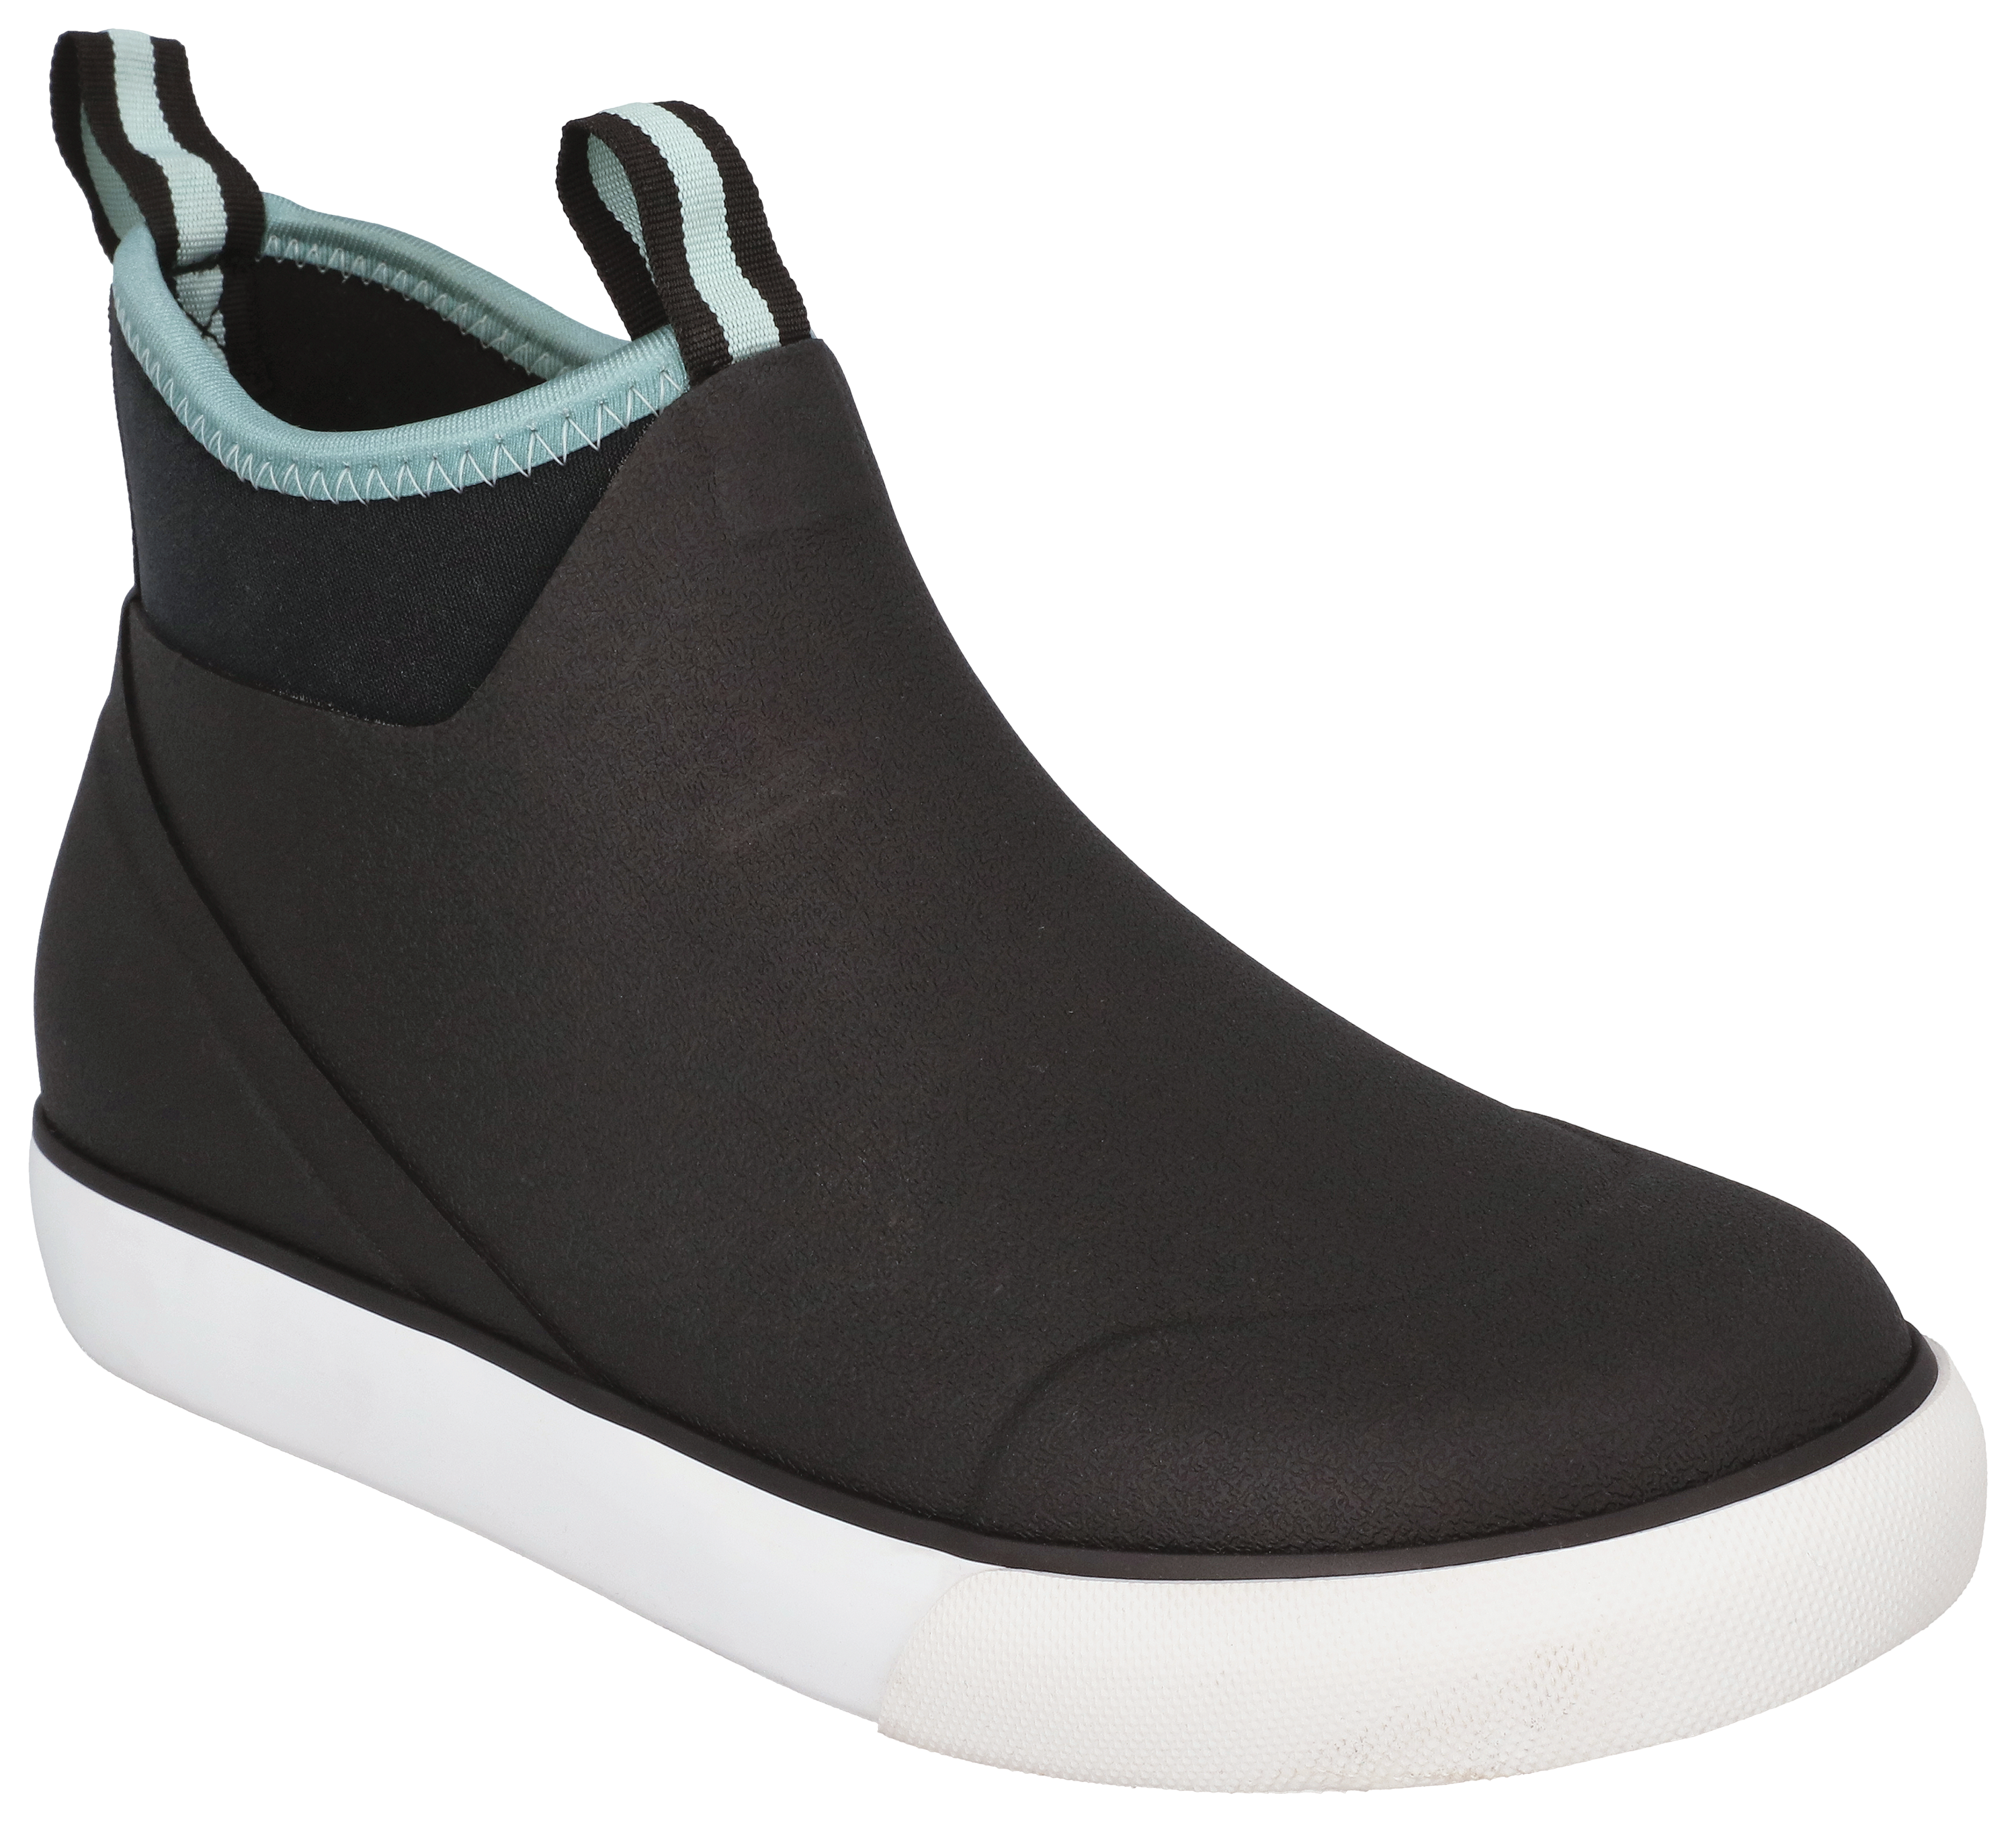 Huk Rogue Wave Deck Boots for Ladies